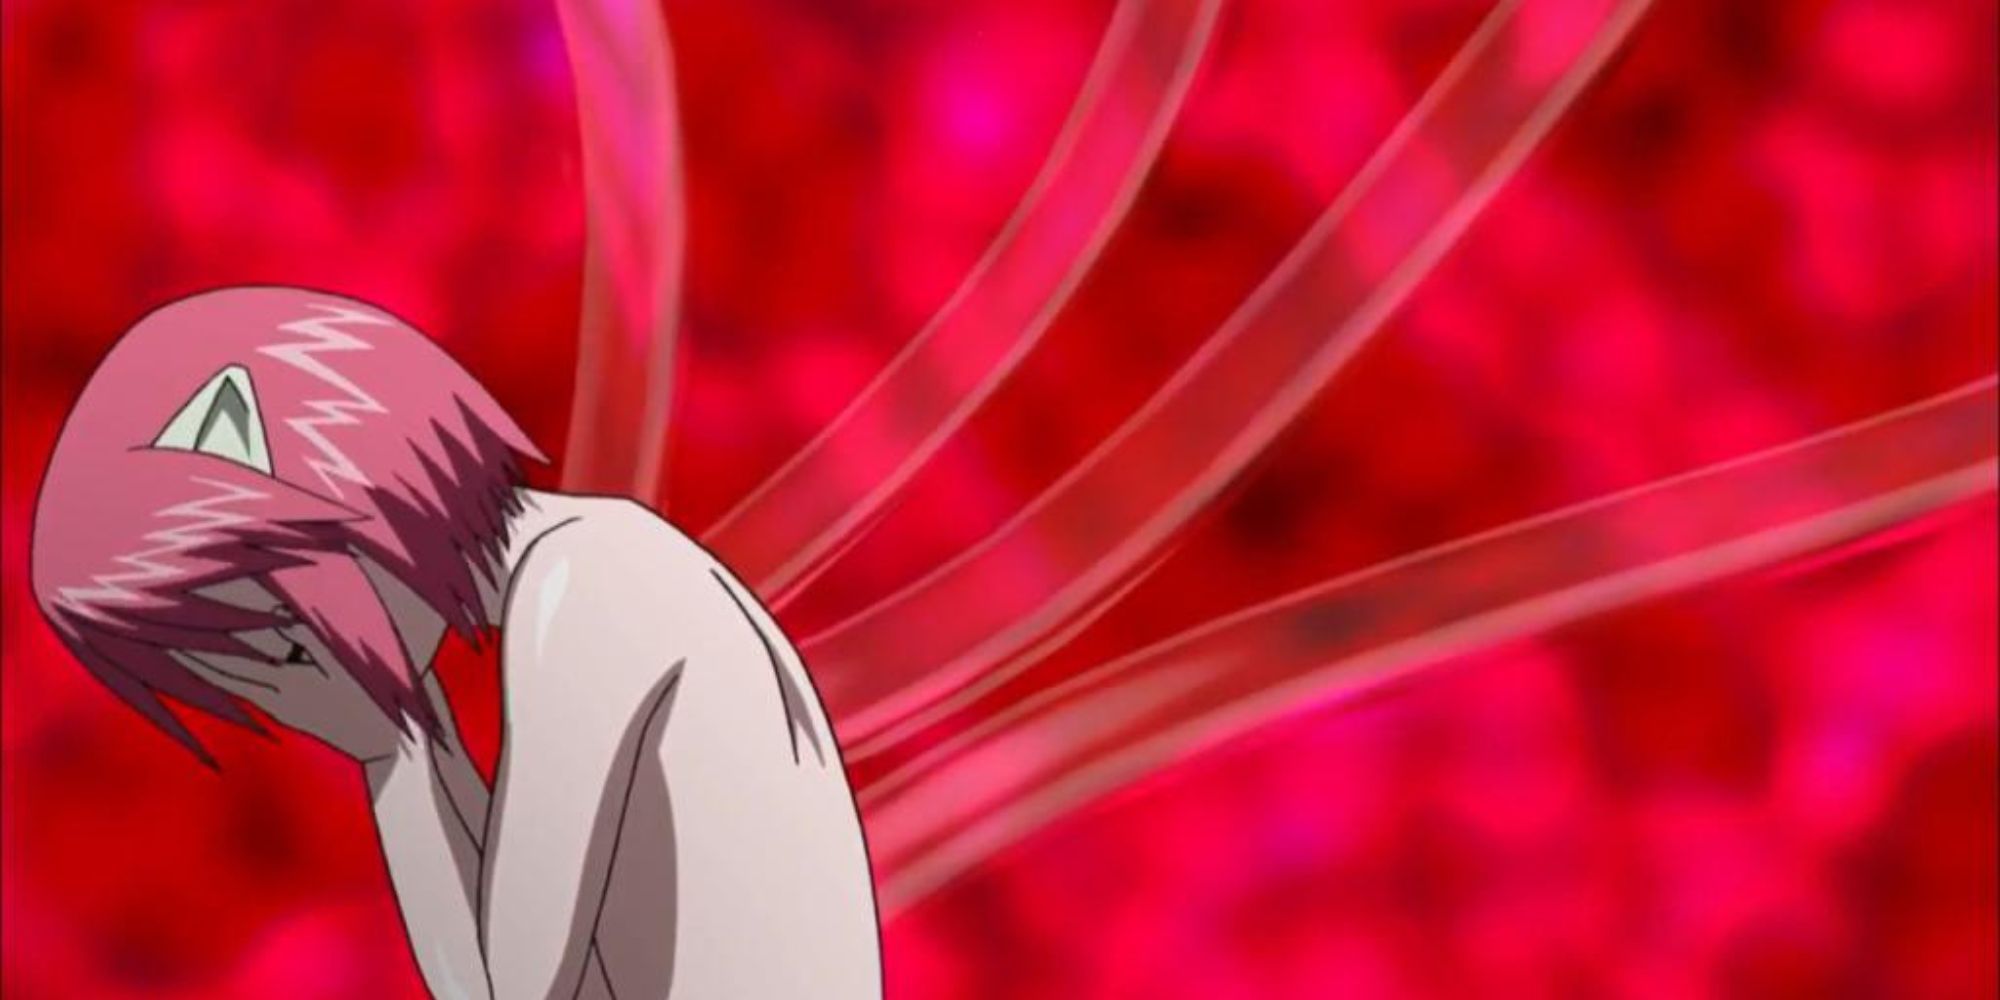 Elfen Lied most brutal and violent anime recommendations